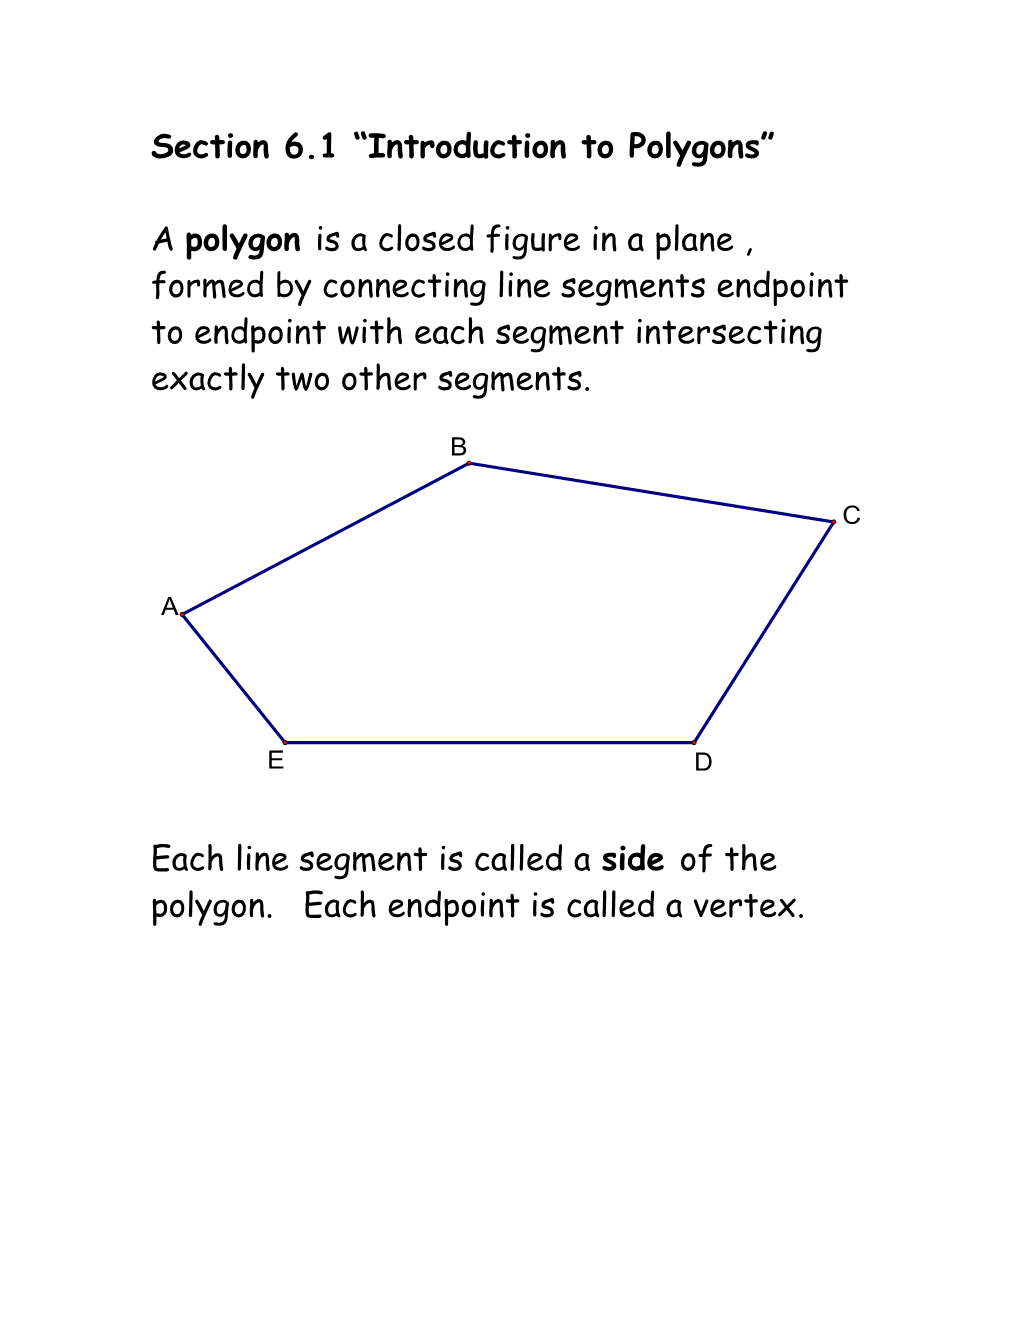 Section 1-4 Introduction to Polygons